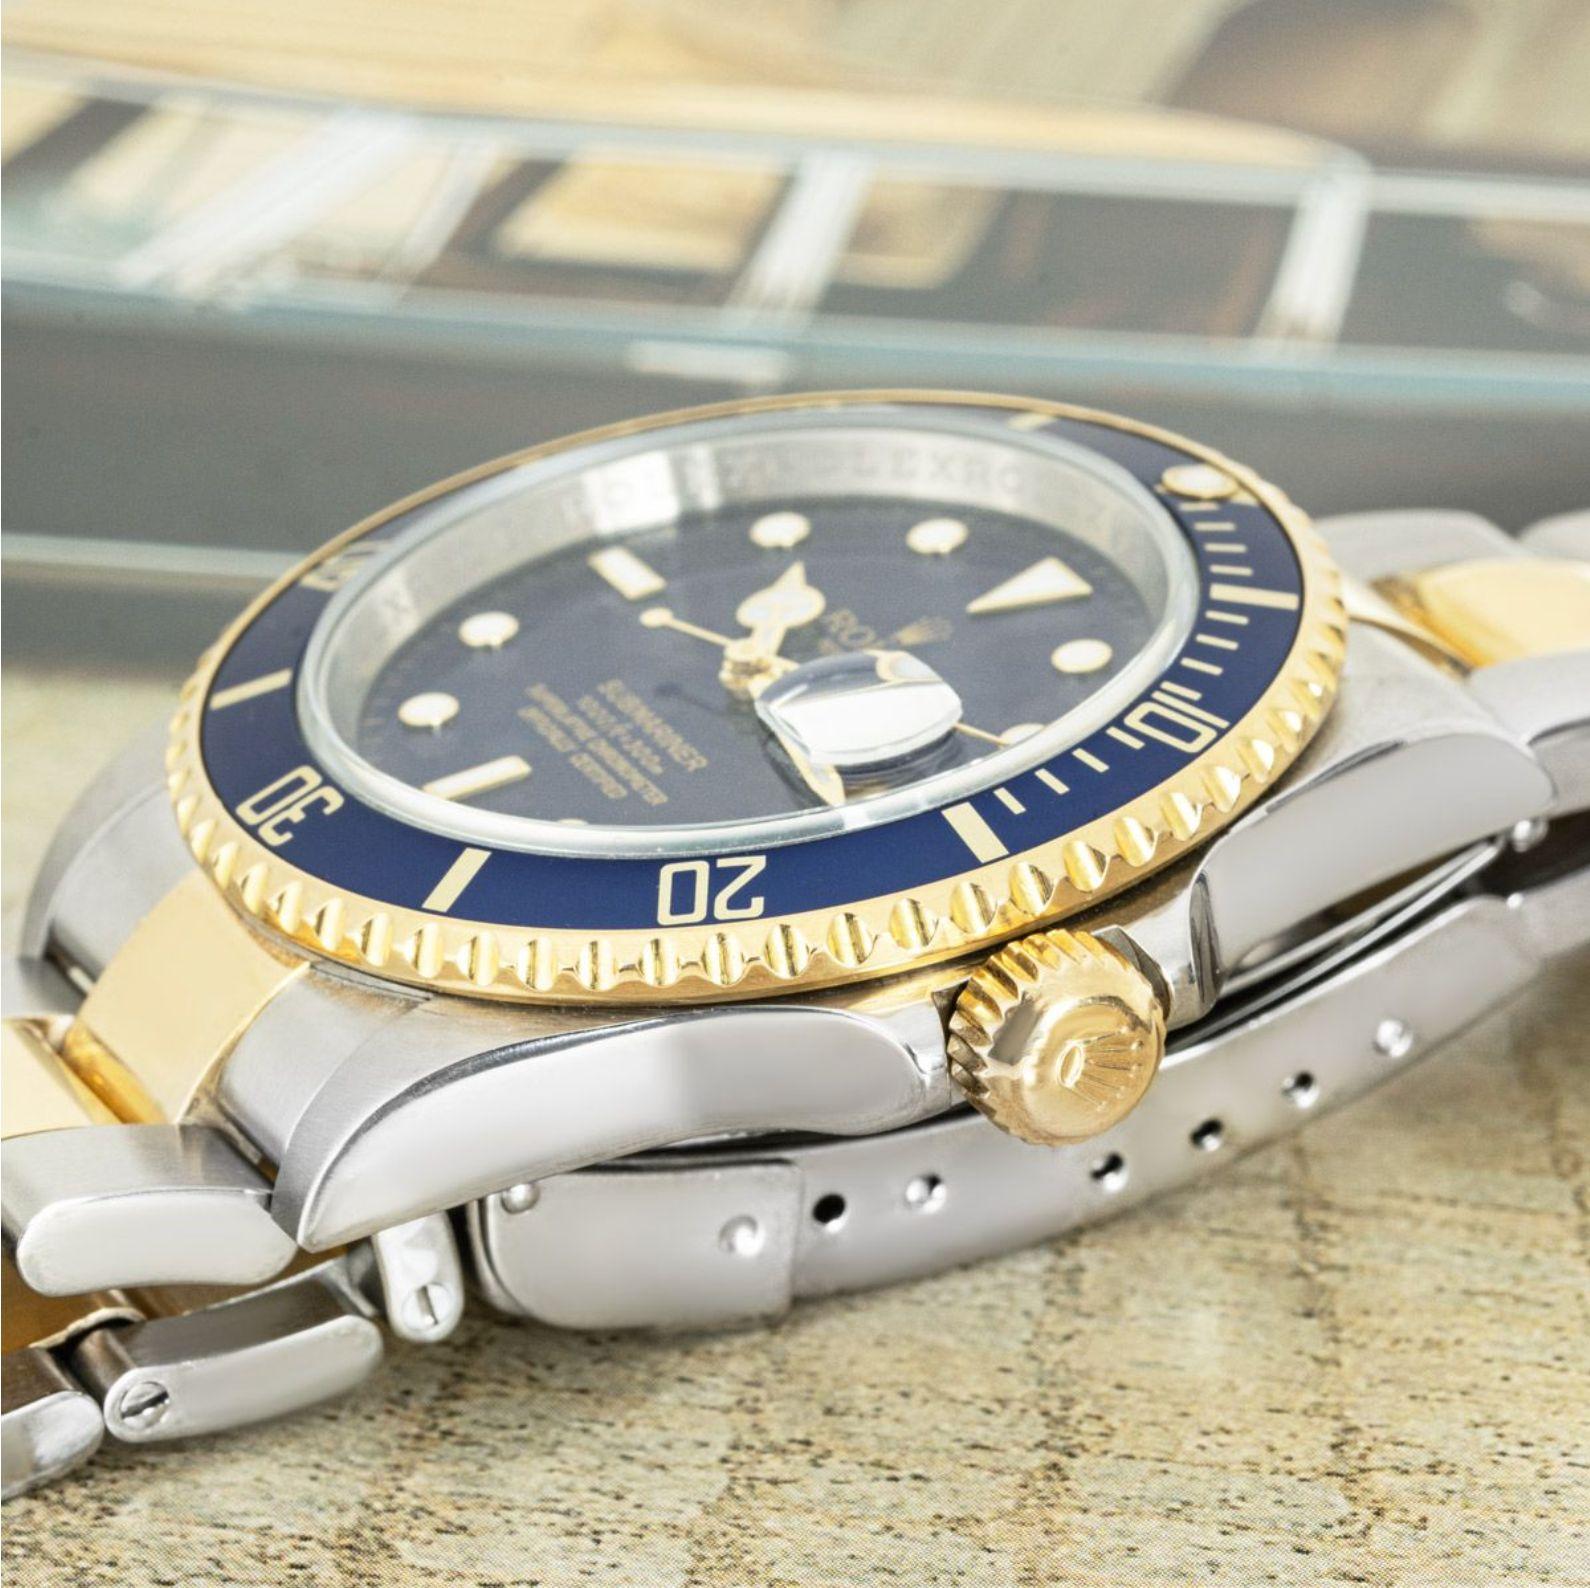 A stainless steel and yellow Submariner Date by Rolex. Featuring a blue dial and a yellow gold uni-directional rotating bezel and a blue bezel insert. Fitted with a sapphire glass and a self-winding automatic movement. The watch is also equipped